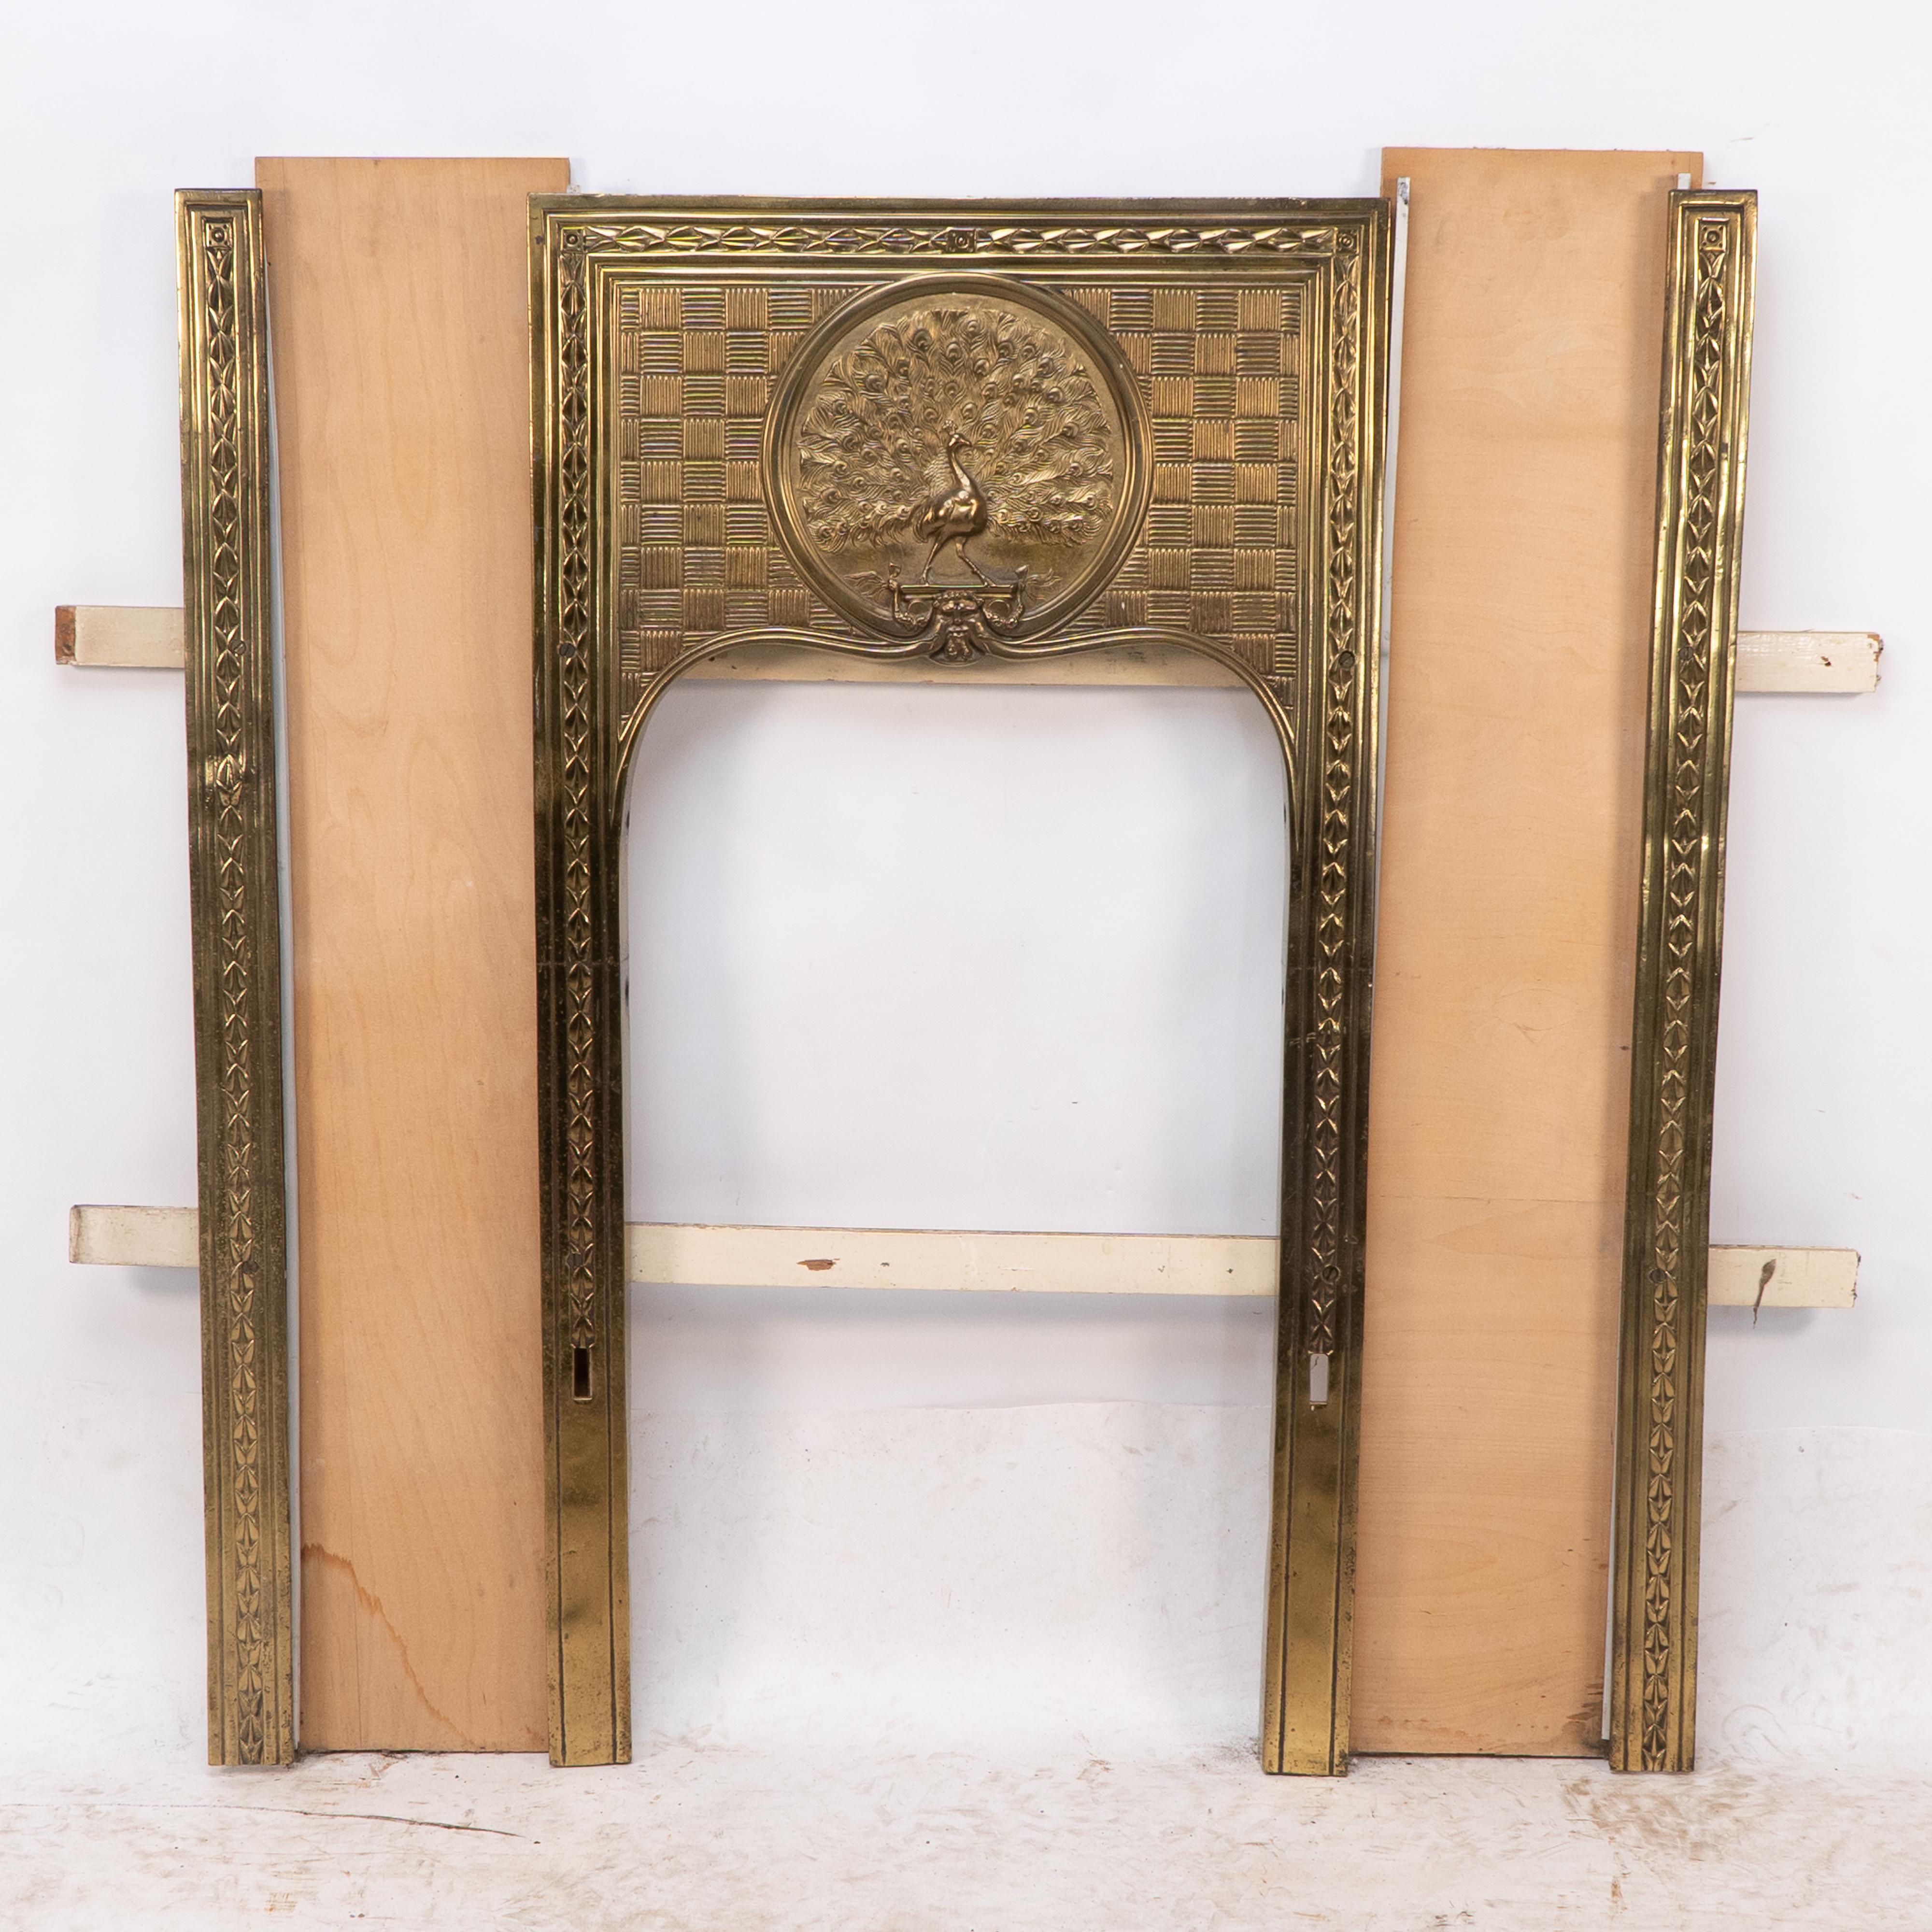 Thomas Elsley attributed. A rare Aesthetic Movement brass fire insert with an upper central peacock and Japanese basket weave decoration around it. Each side is designed to display tiles. Dimensions of opening: 67 cm x 37.5 cm
